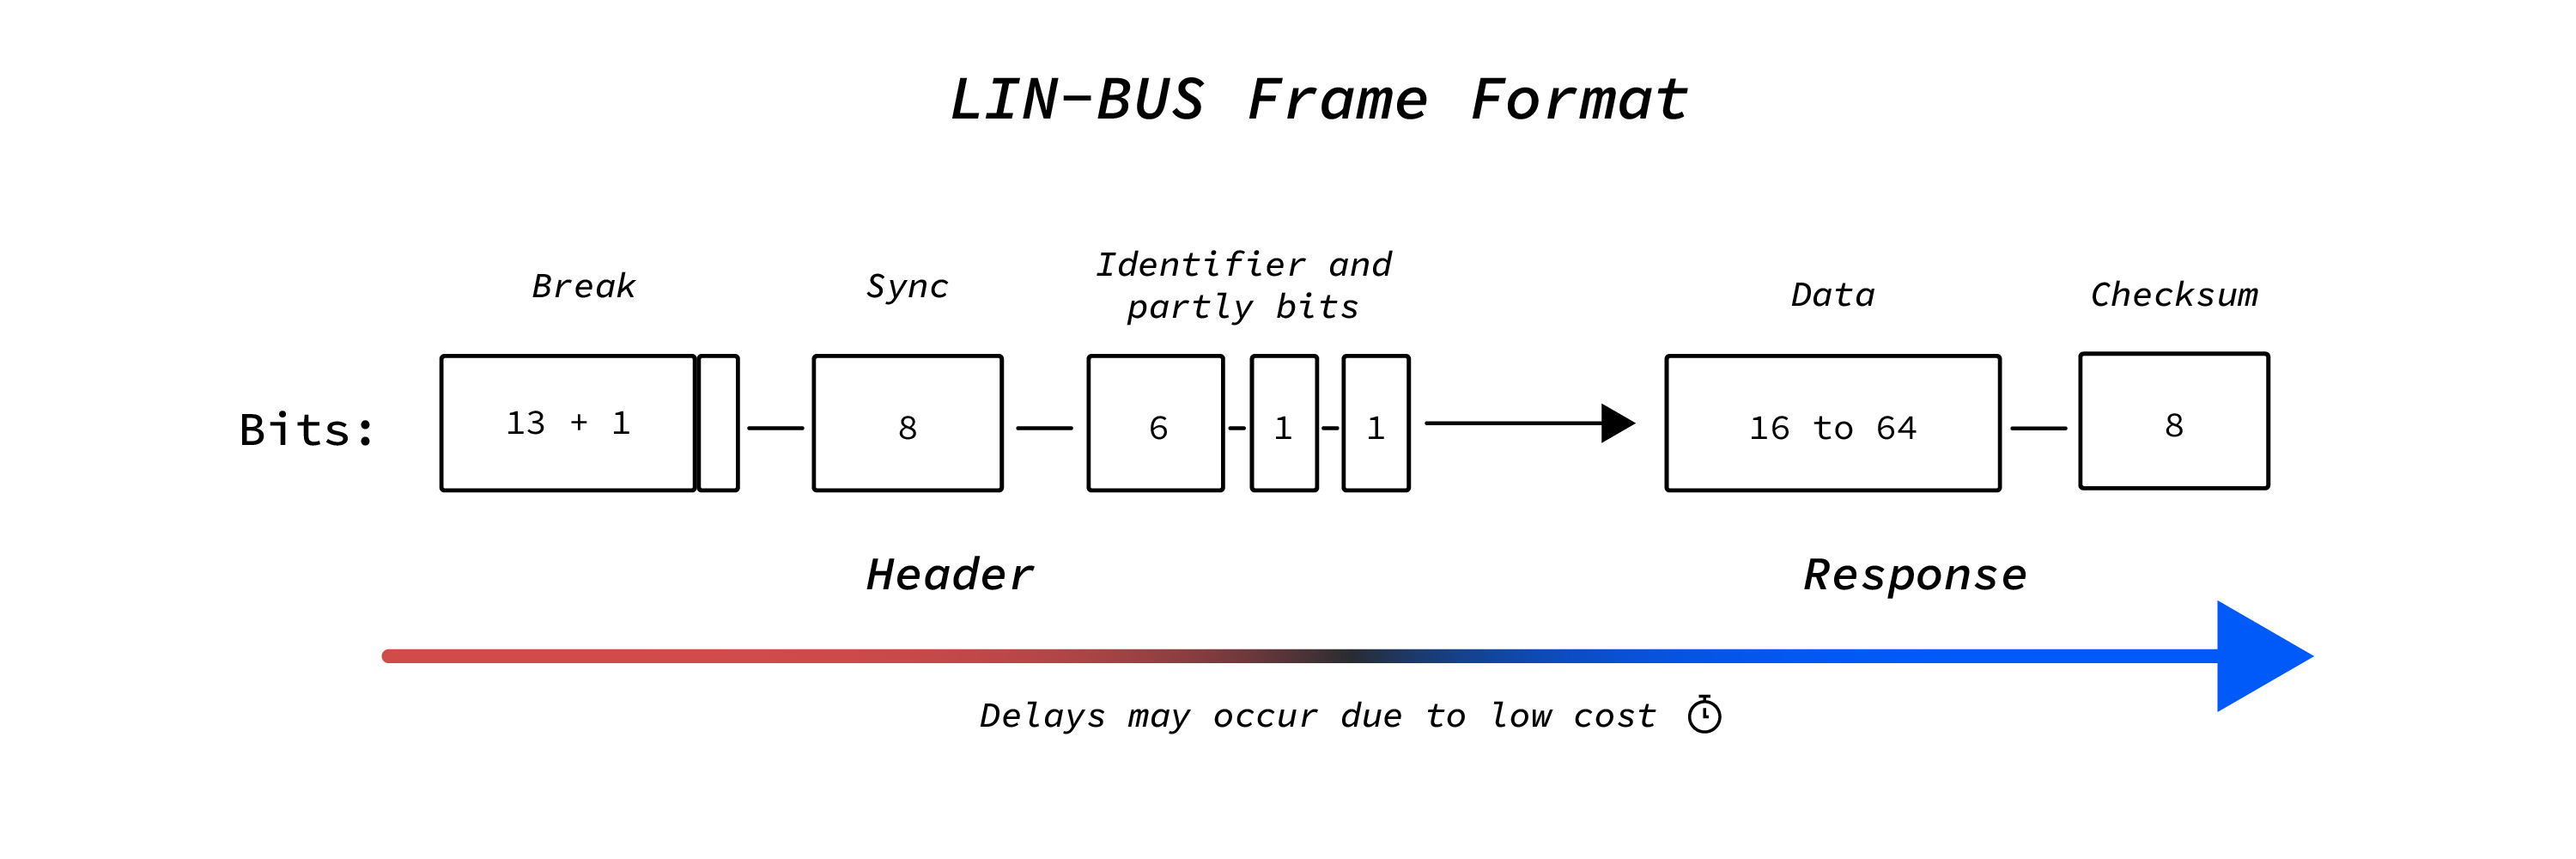 LIN Bus frame explained in an easy picture